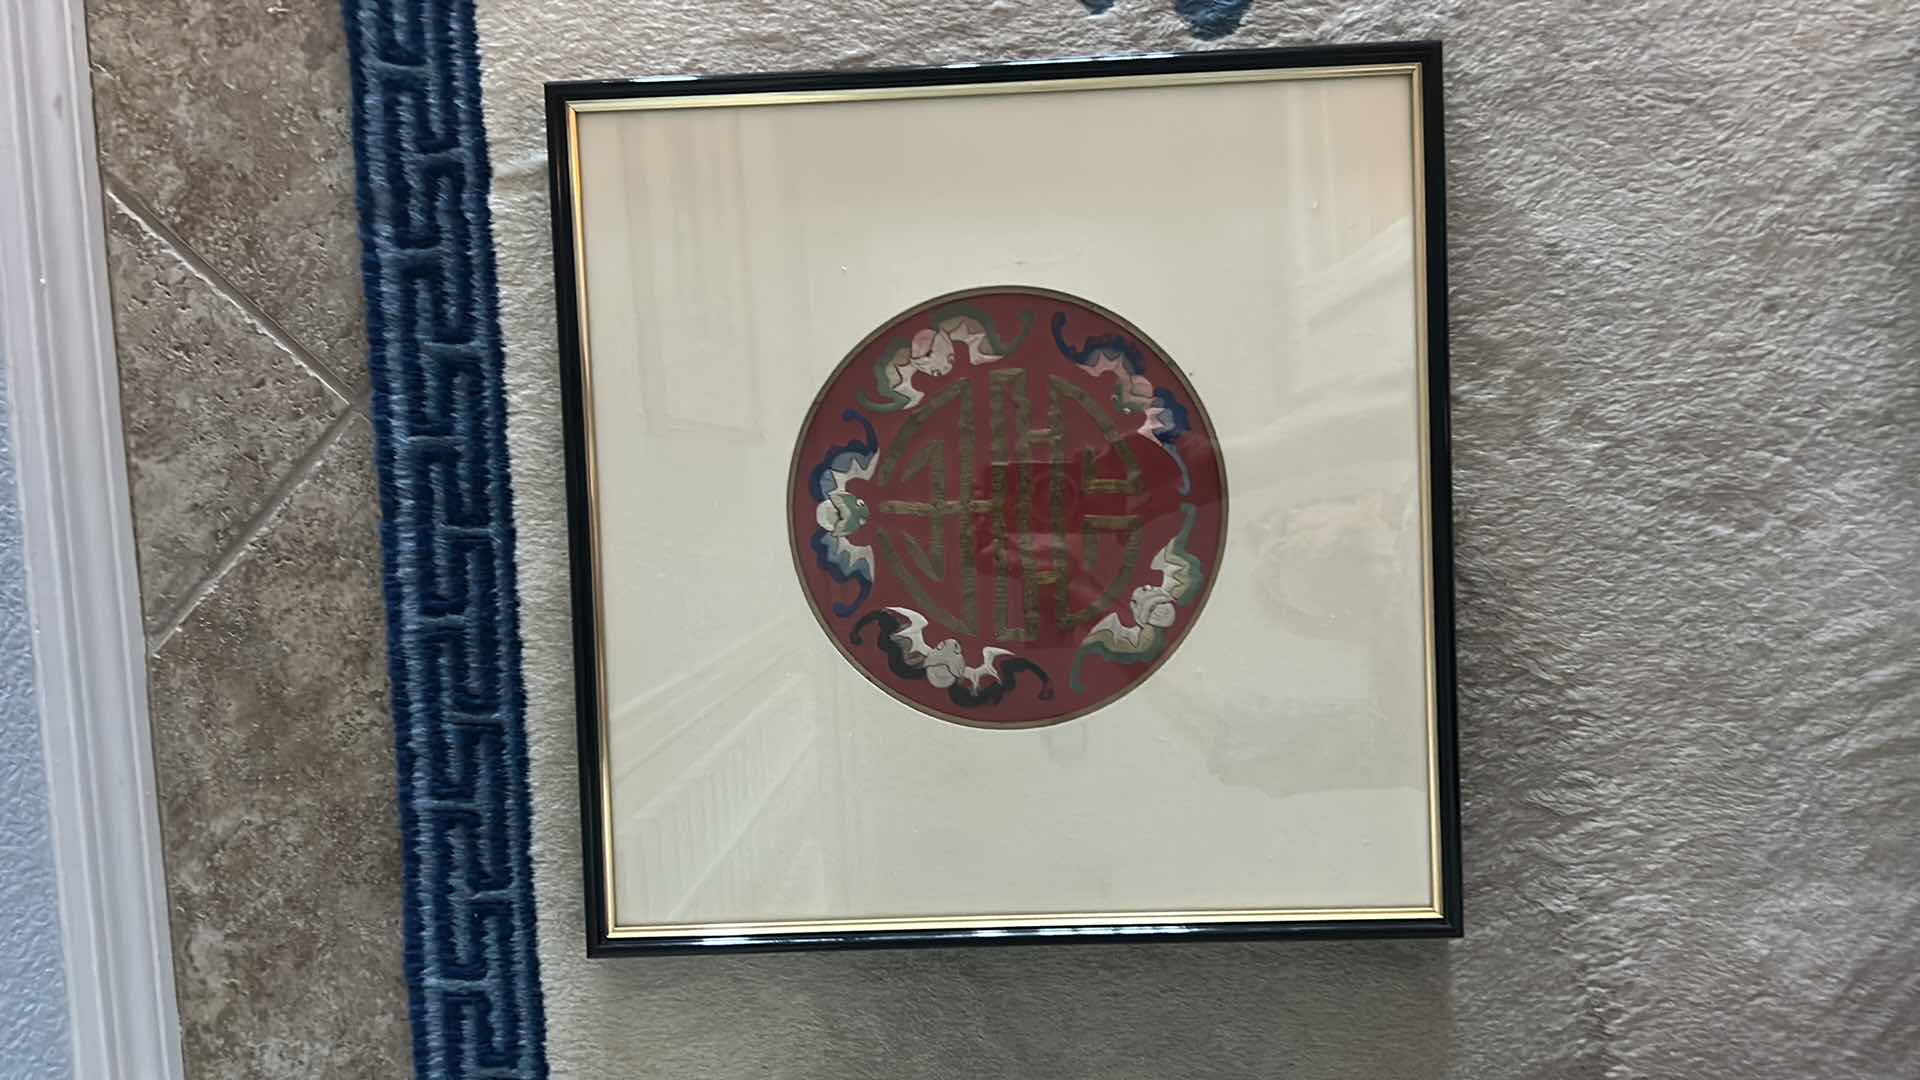 Photo 6 of ANTIQUE CHINESE TEXTILE FABRIC, SILK WITH SILK THREAD HAND EMBROIDERY ARTWORK FRAMED 18” x 18”